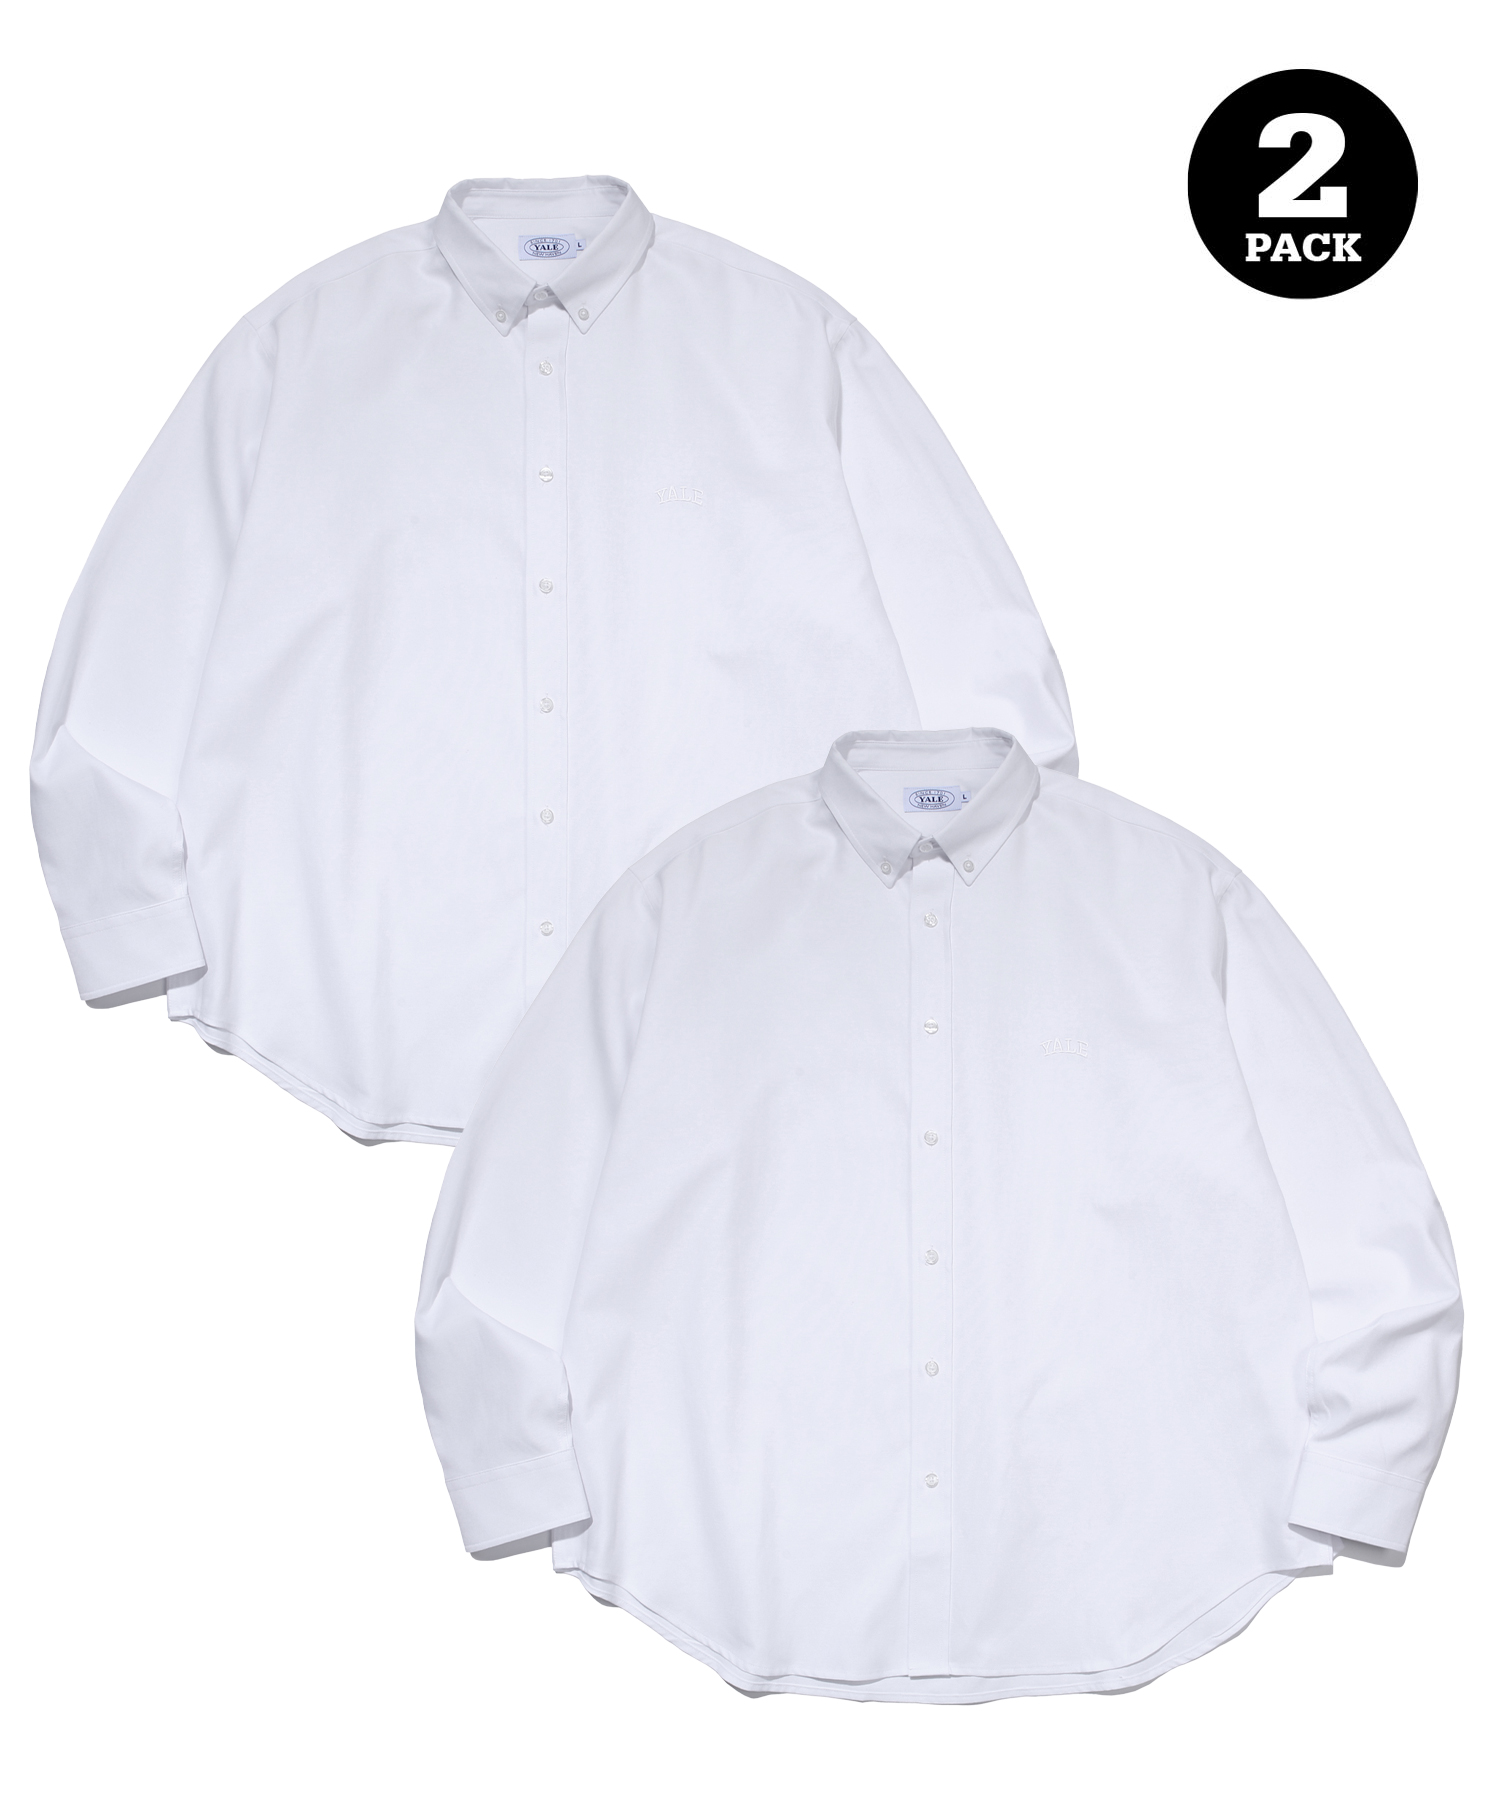 (24SS) [ONEMILE WEAR] 2PACK OXFORD BIG SHIRT WHITE / BLUE STRIPE